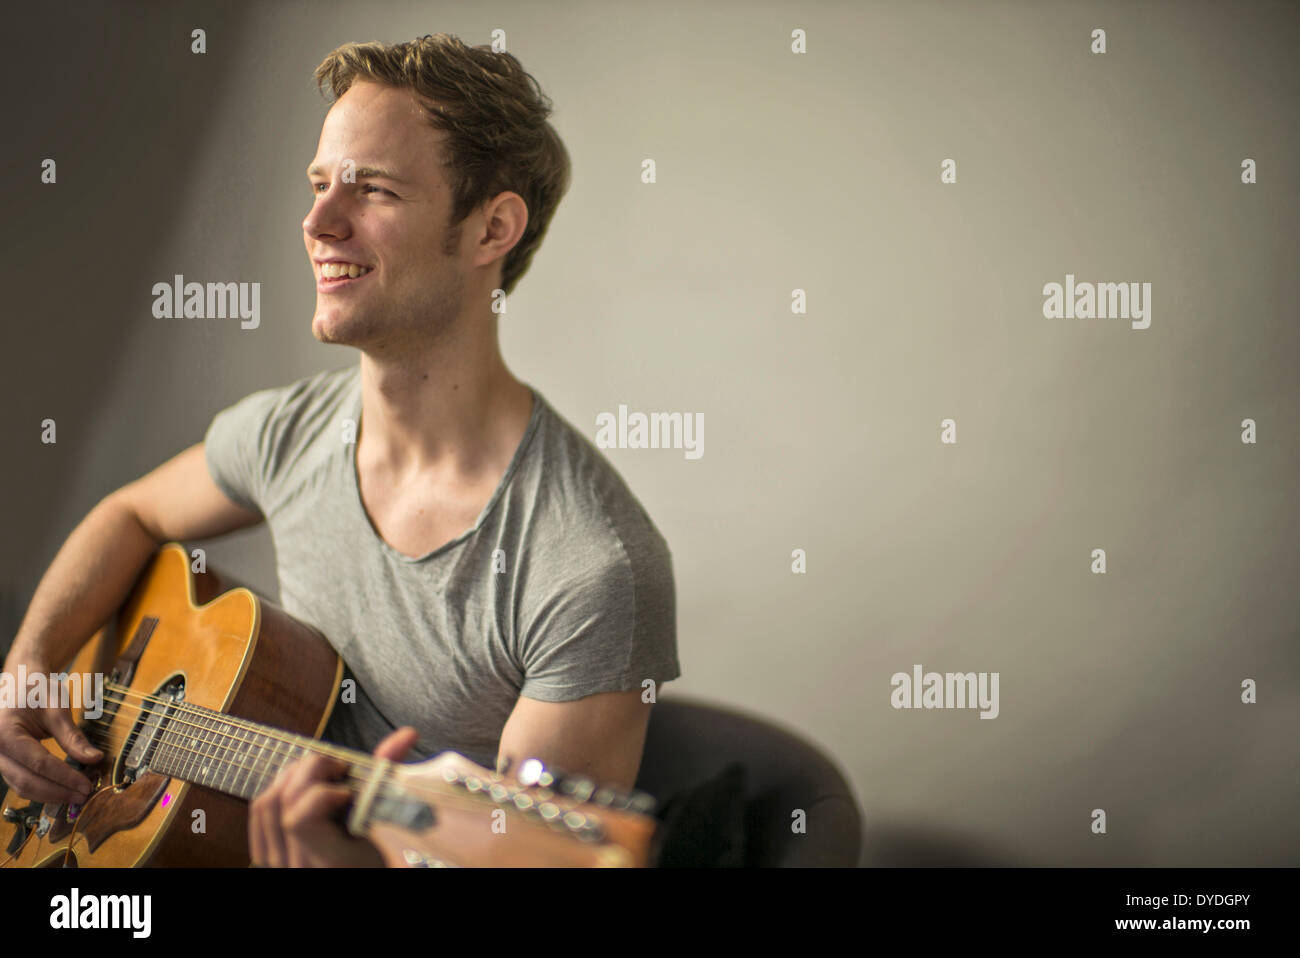 A beautiful young man playing acoustic guitar. Stock Photo